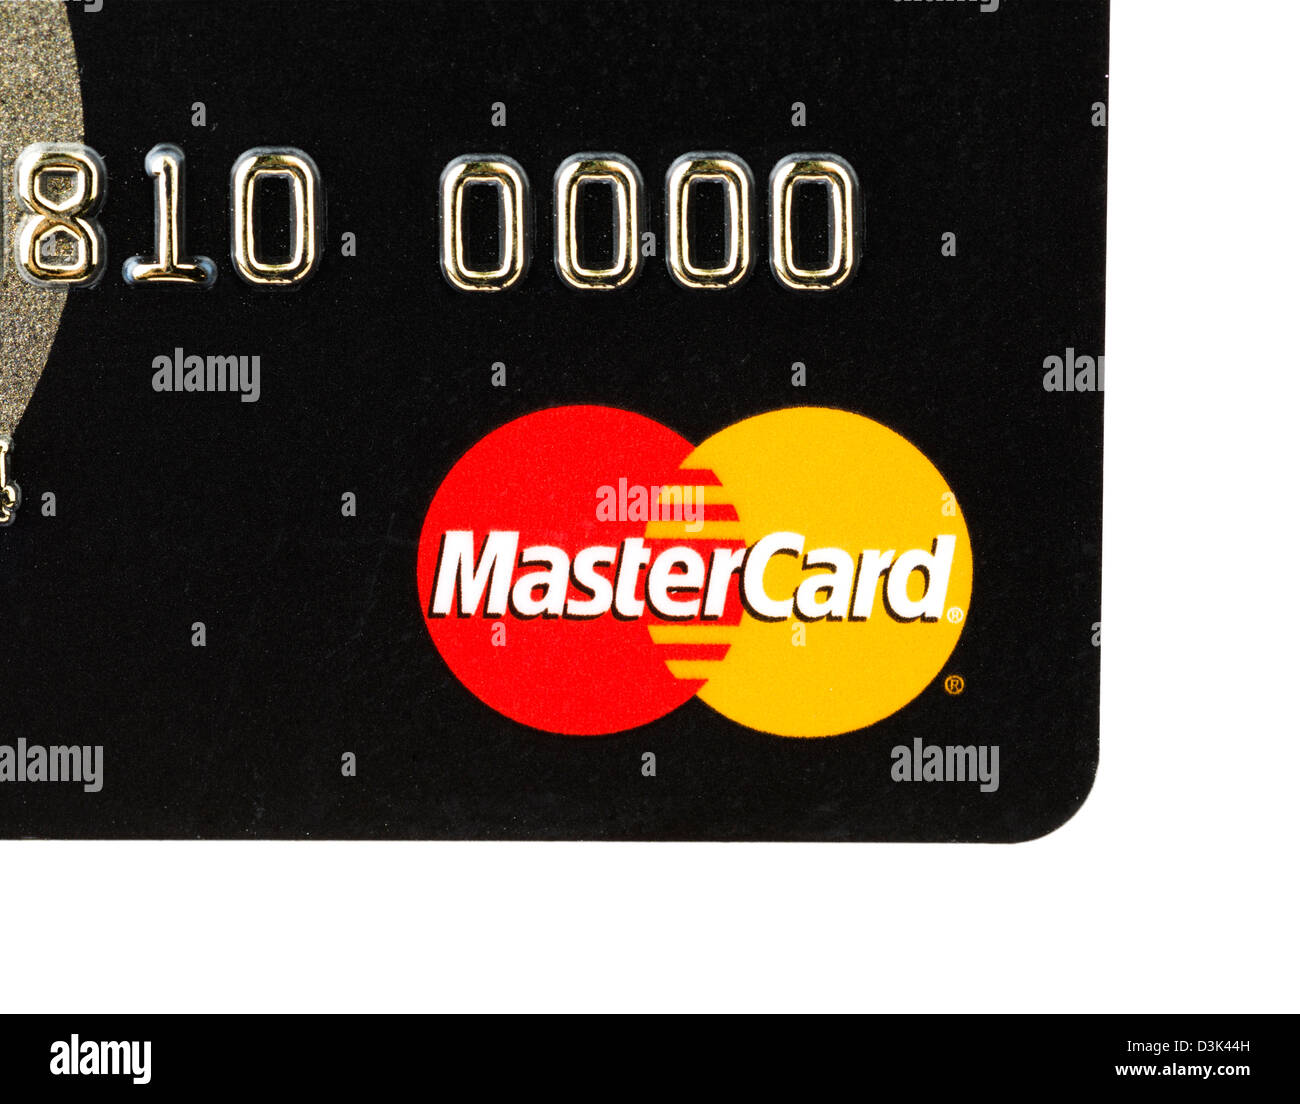 MasterCard credit card issued in the UK Stock Photo